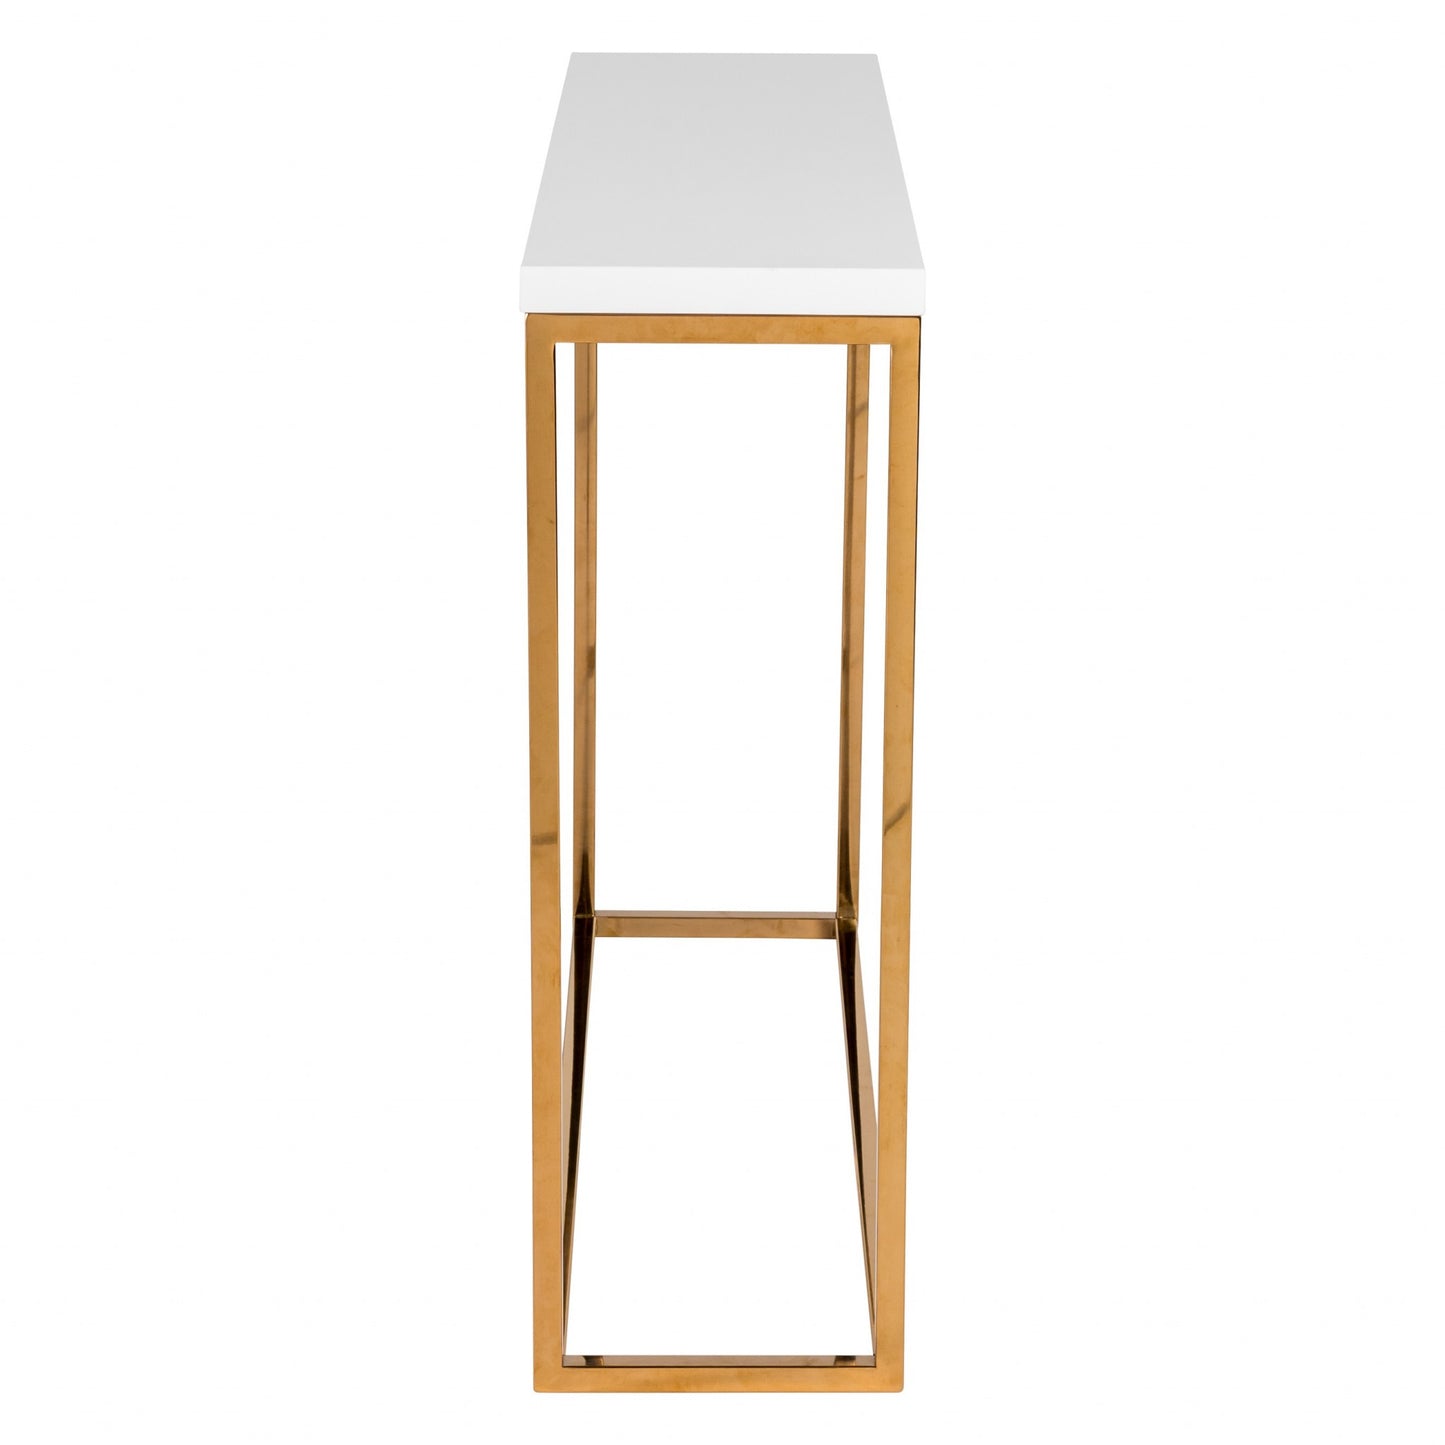 Modern White Gloss andn Gold Console Table